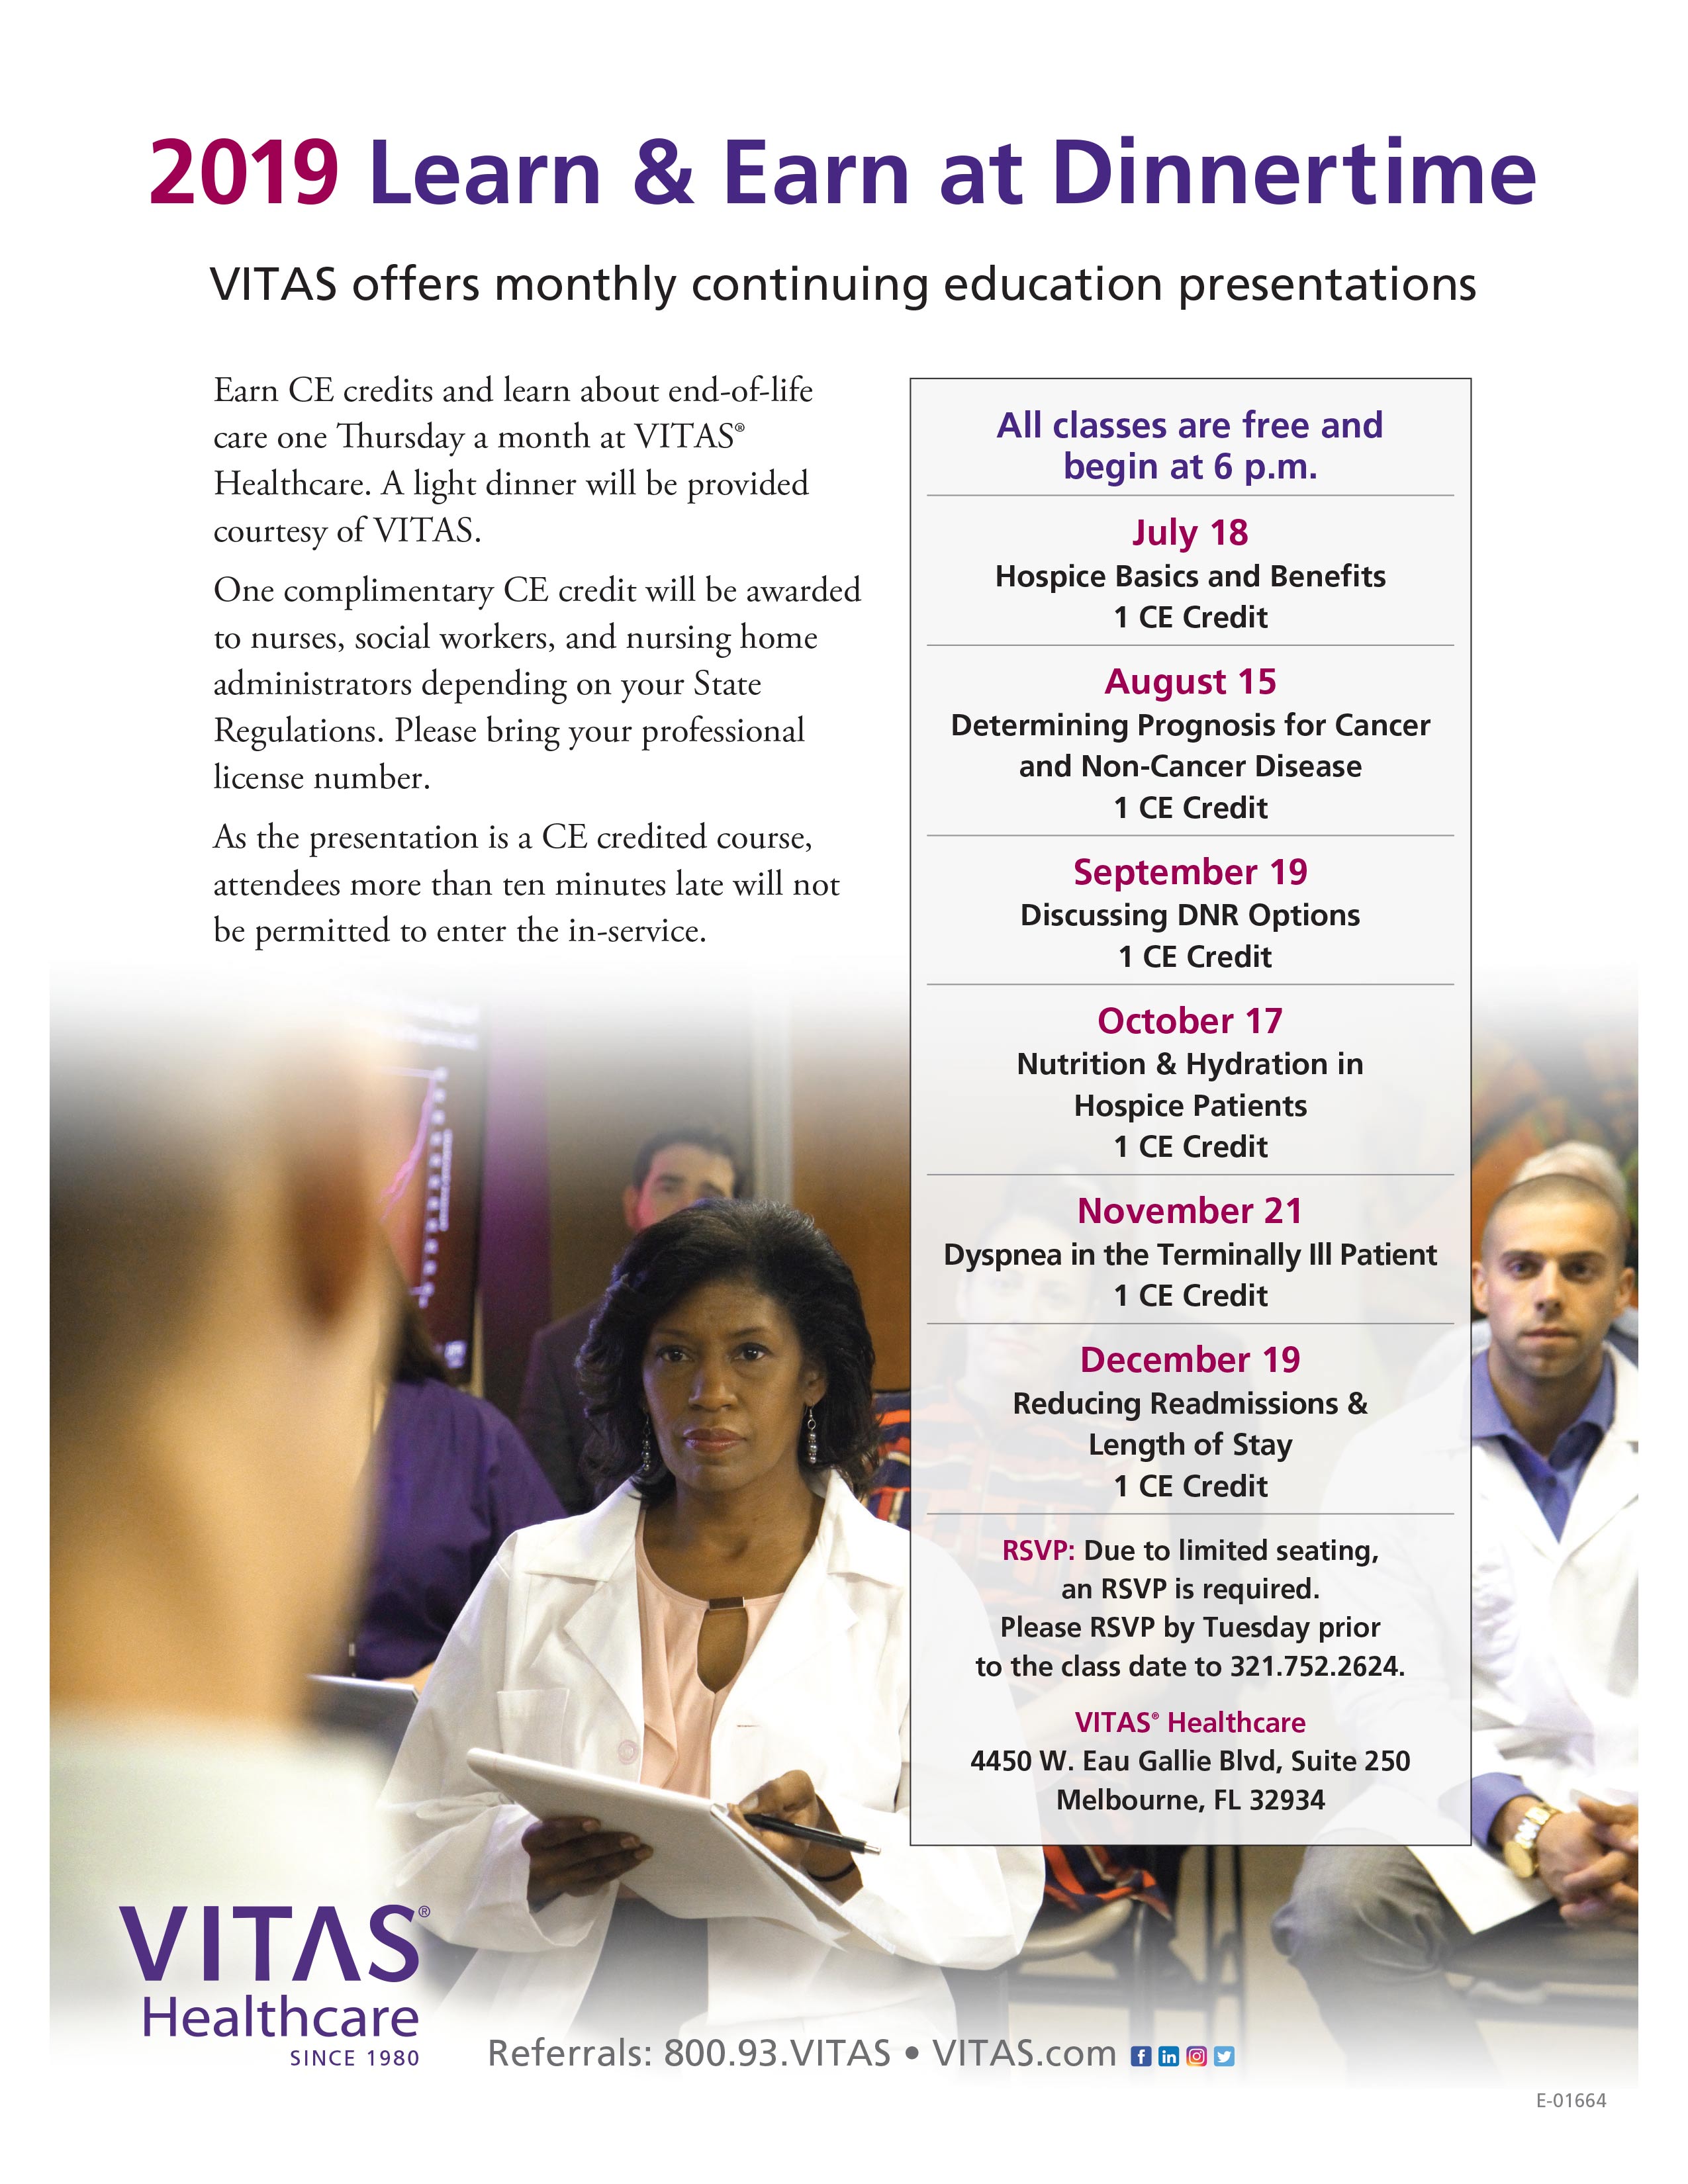 2019 Learn & Earn at Dinnertime offered by VITAS Healthcare